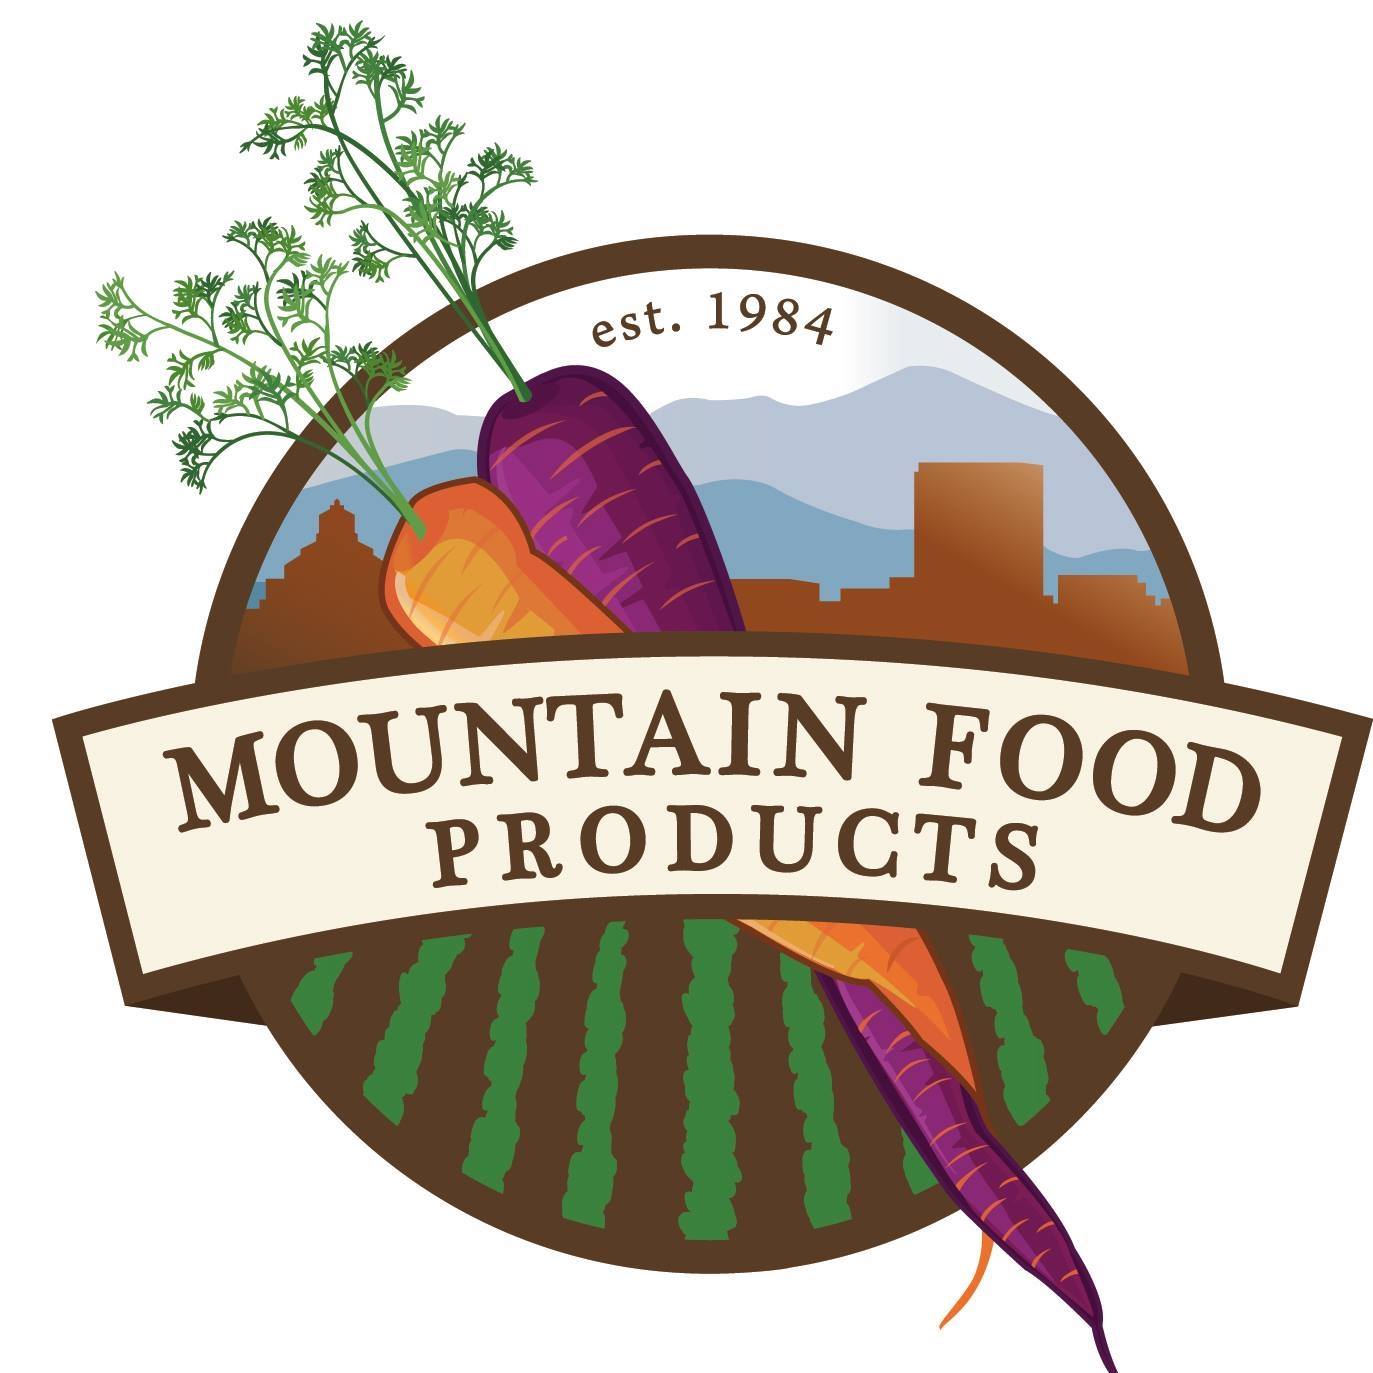 Mountain Food Products